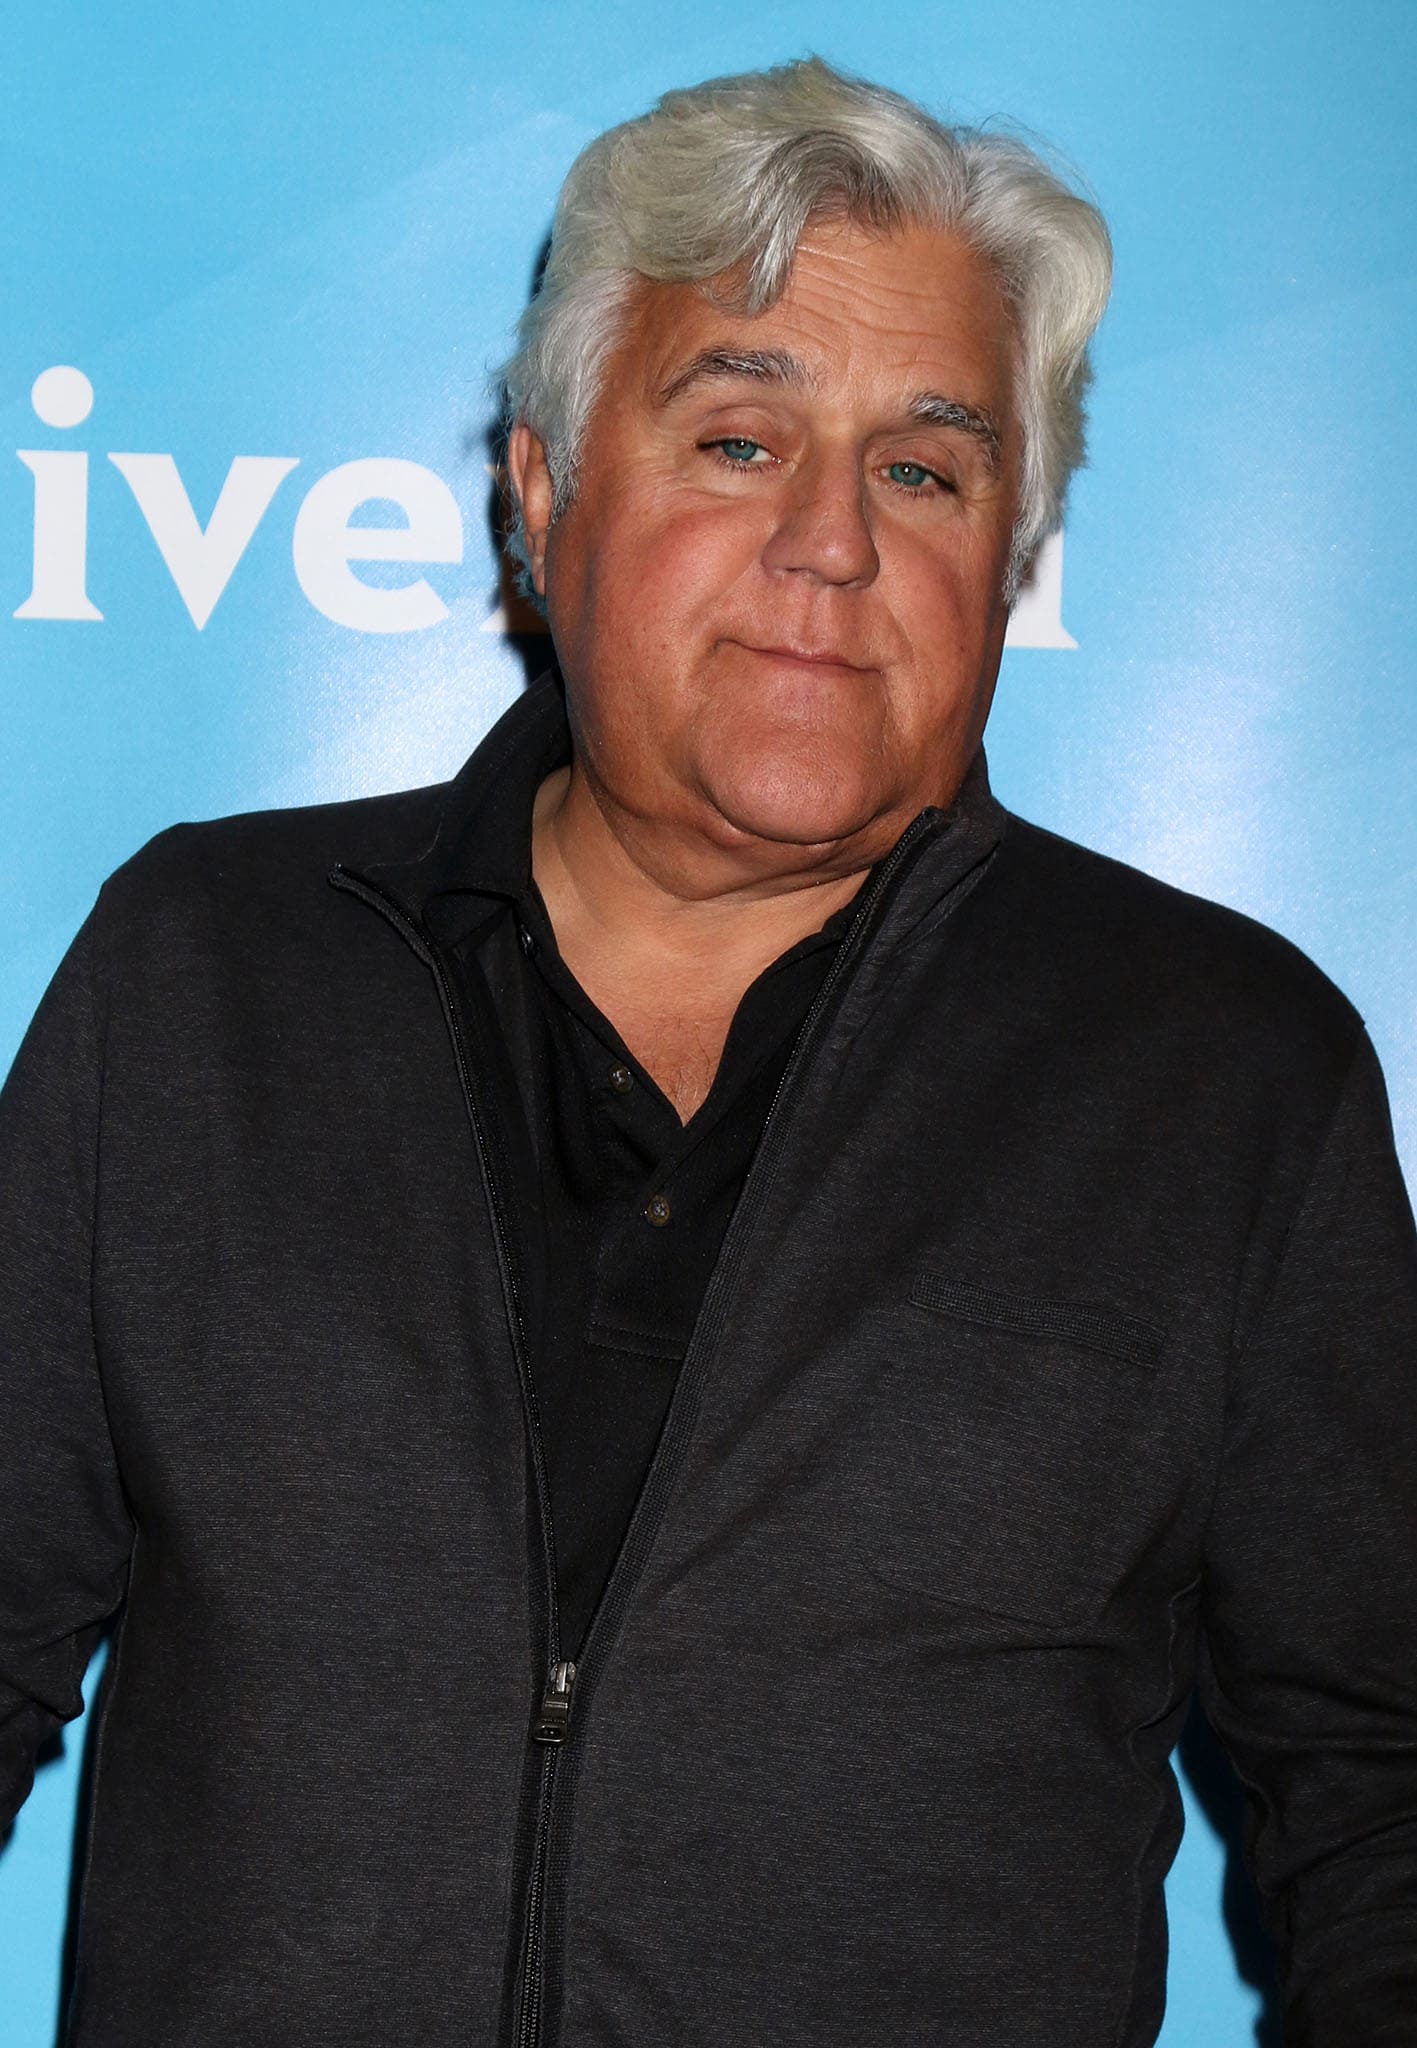 After doing stand-up comedy for years, Jay Leno rose to fame for hosting NBC's The Tonight Show with Jay Leno from 1992 to 2009, Jay Leno's Garage since 2015, and the on-going 2021 revival of You Bet Your Life